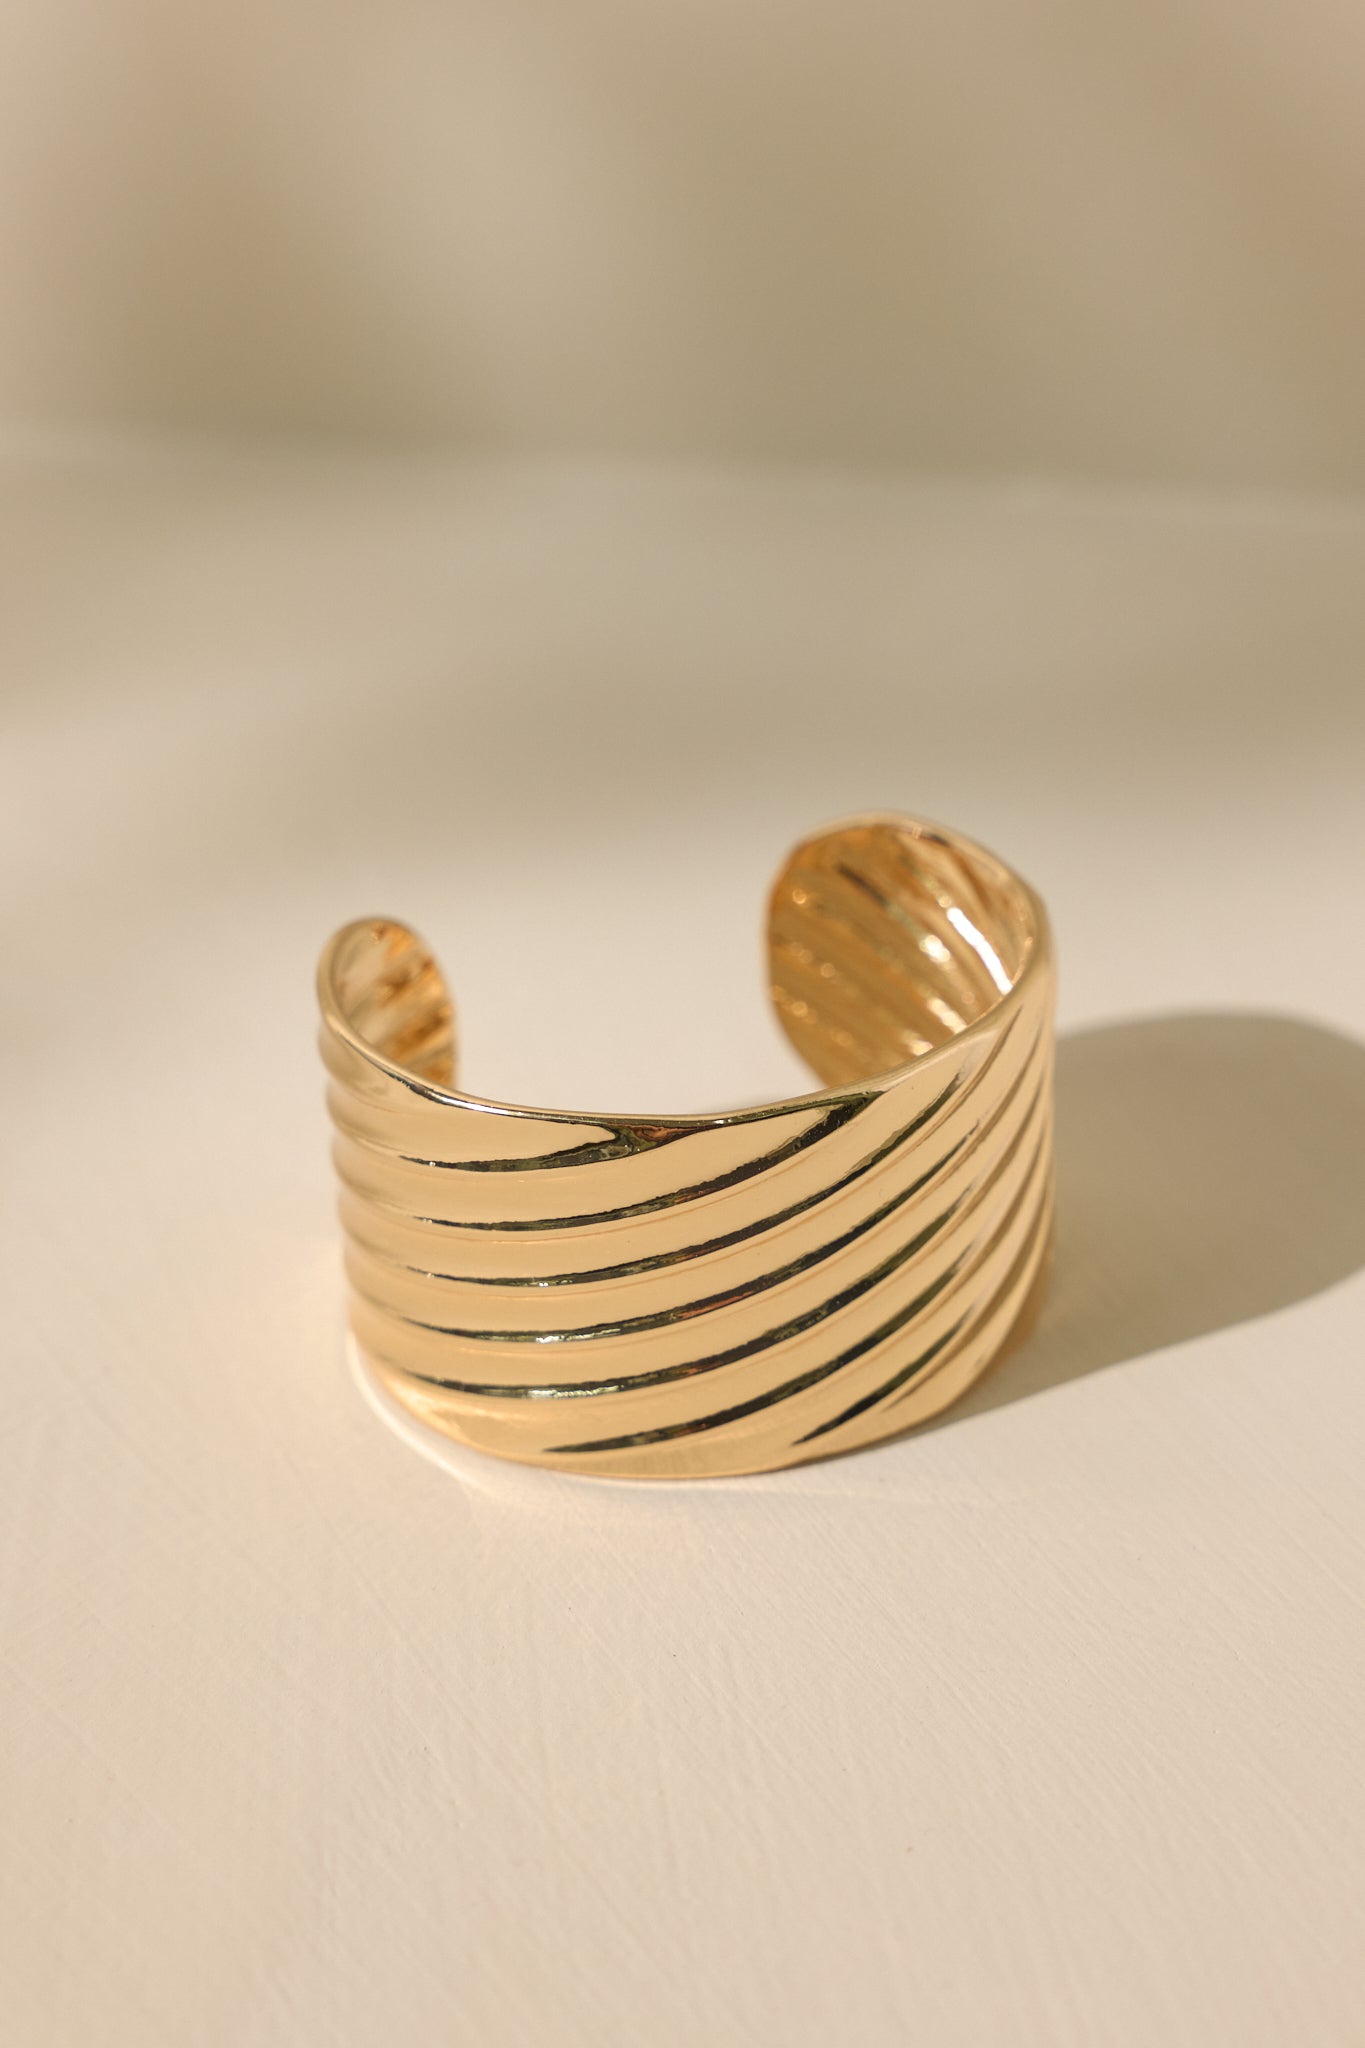 Close-up detailed shot of this gold cuff that features shiny hardware, a textured material, a thick band, and rounded edges.